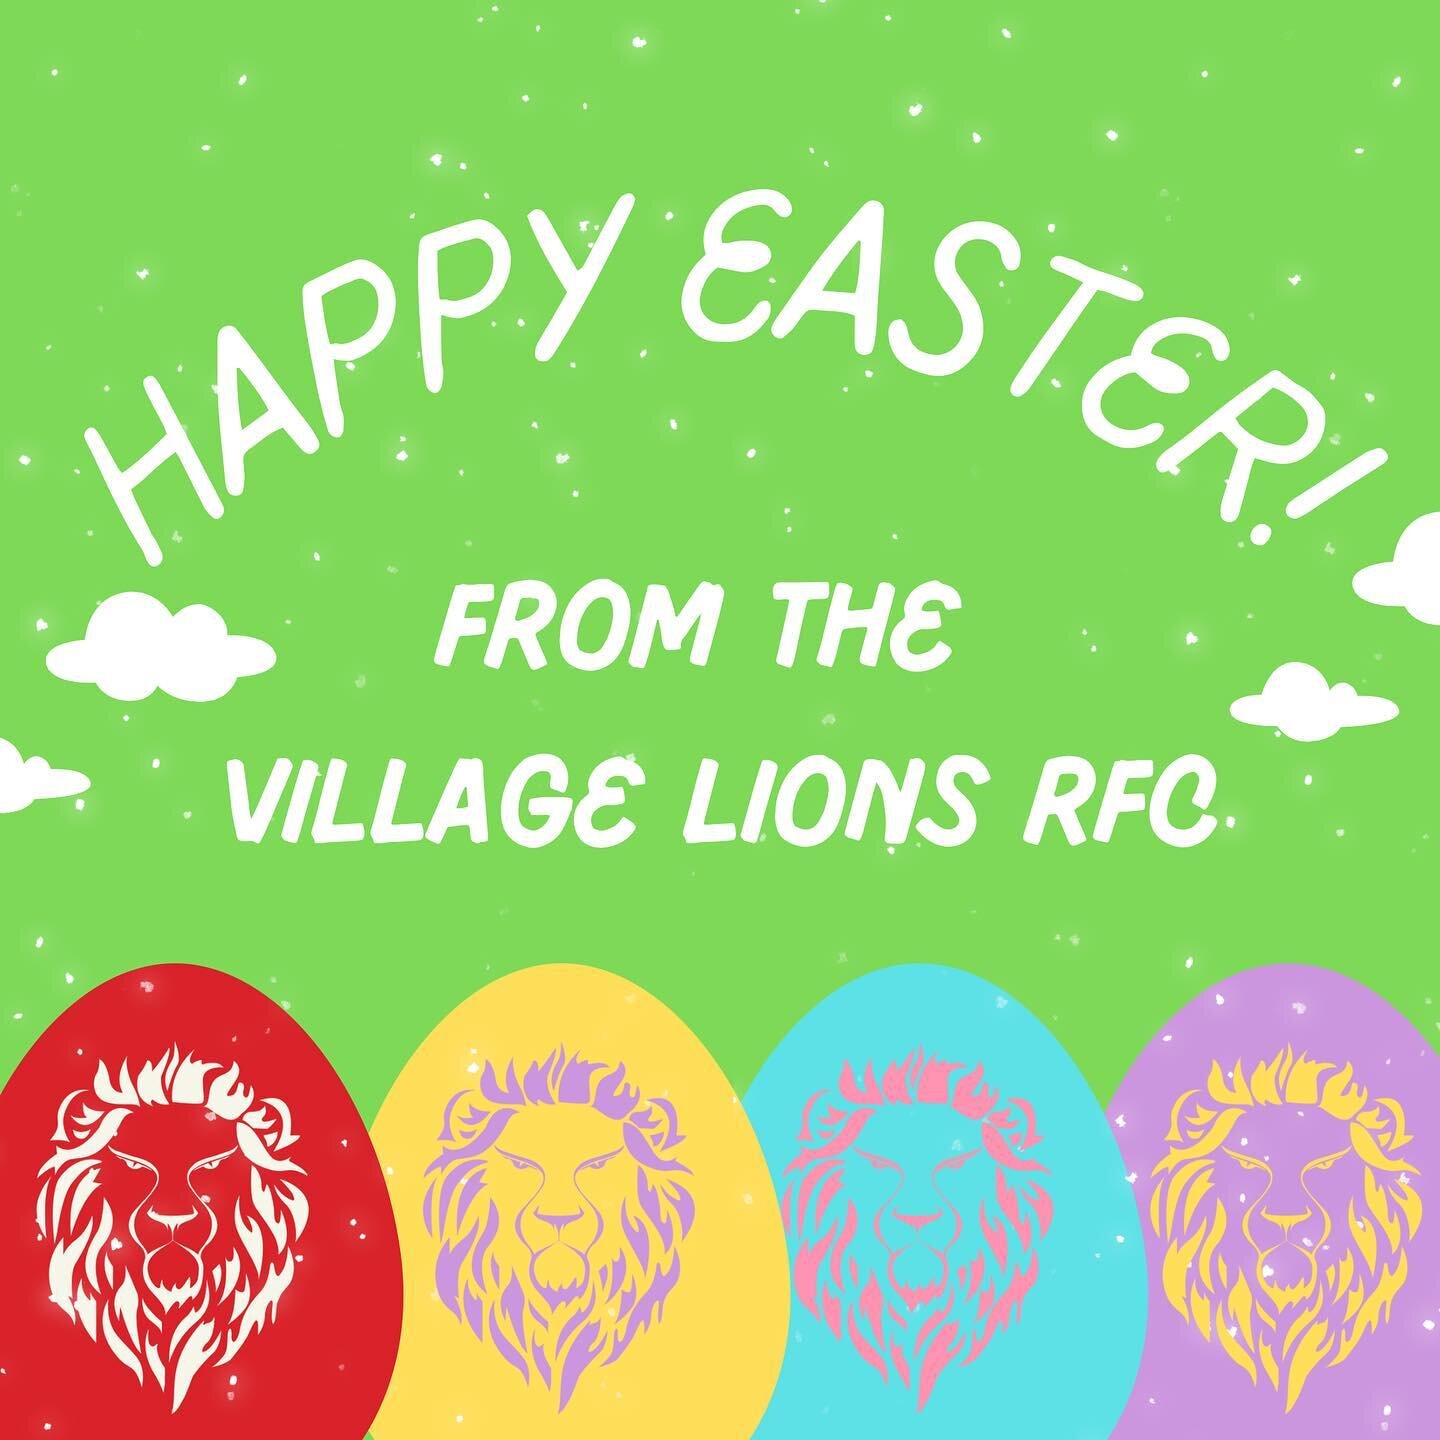 We don&rsquo;t like to think a rugby ball are egg-shaped, but rather an egg is ball shaped. So get ready for the spring season by picking up as many Easter eggs as you can! Happy Easter to all who celebrate!